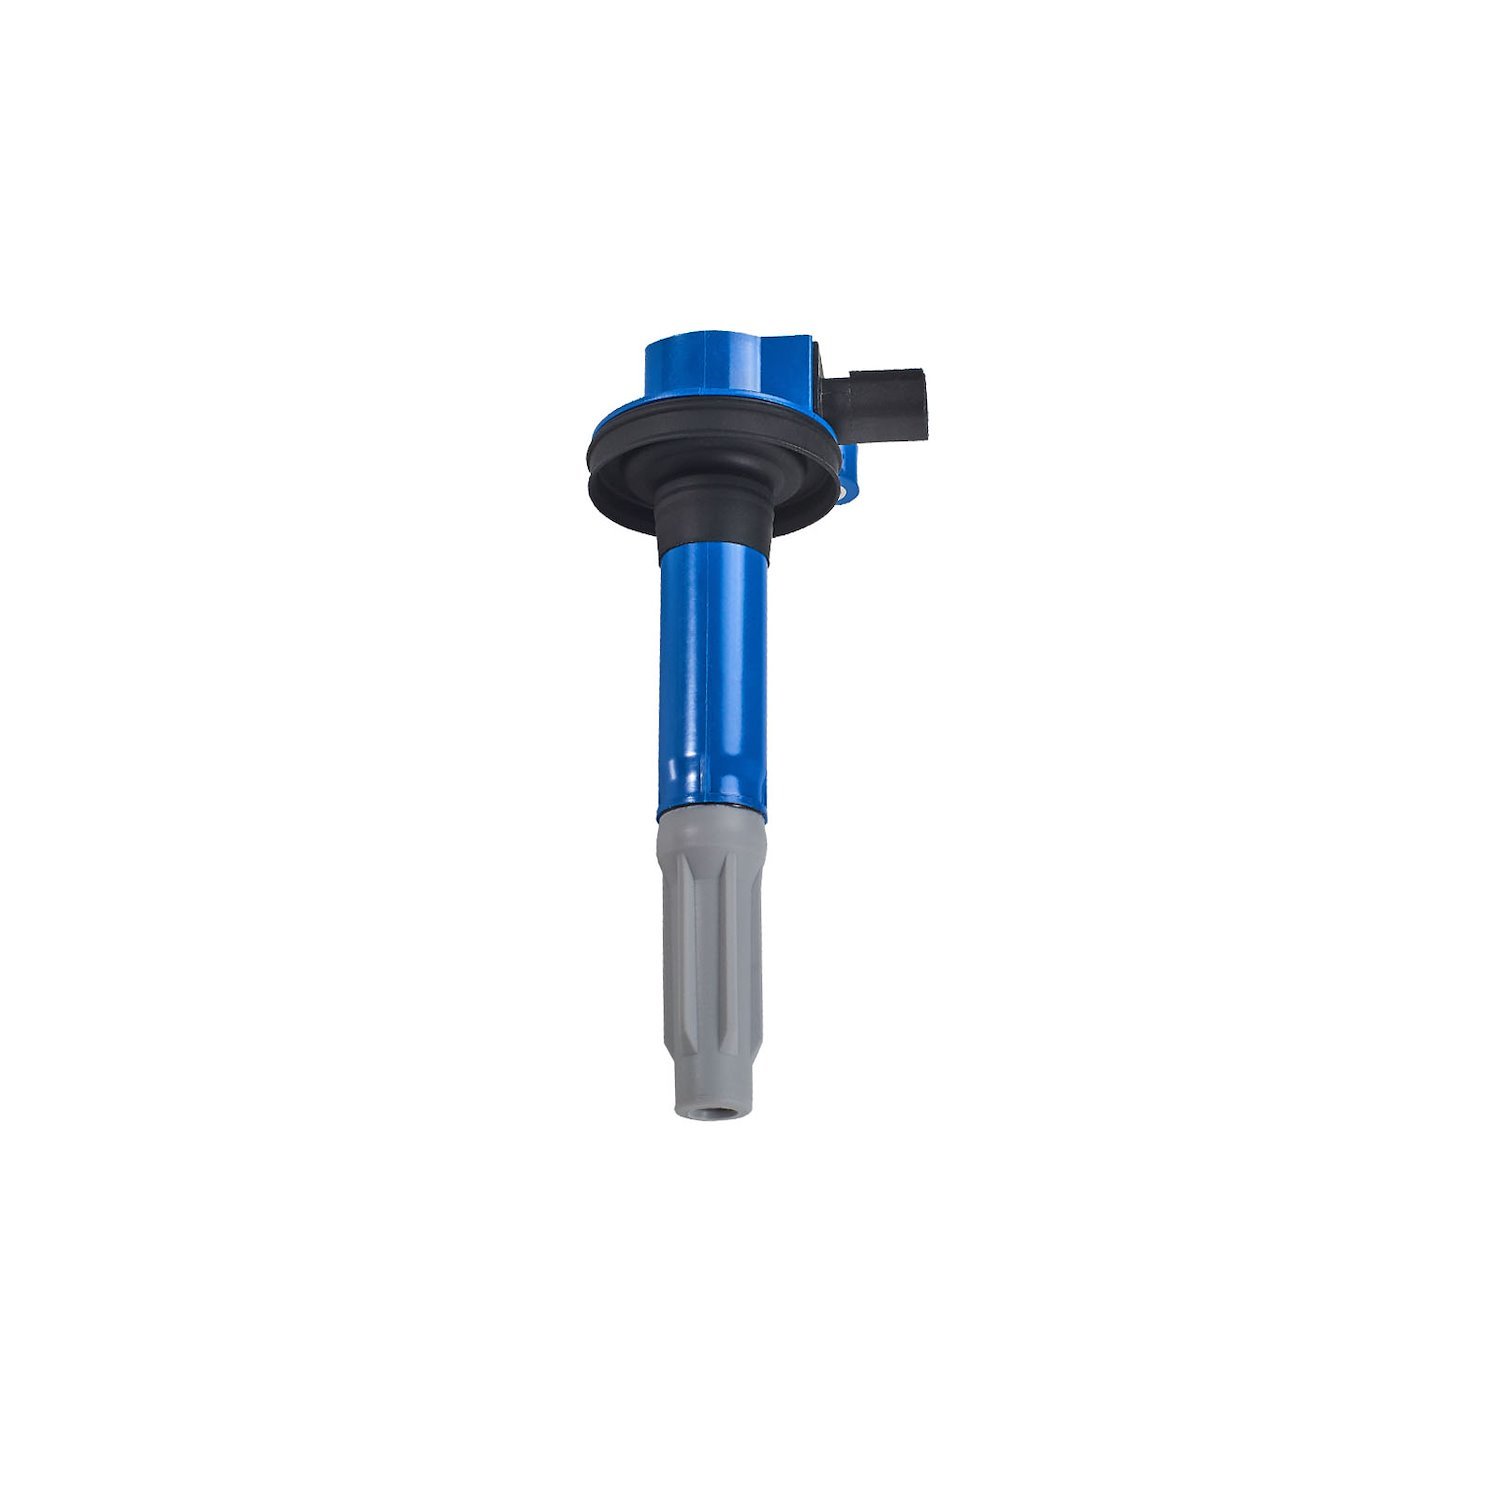 High-Performance Ignition Coil for Ford F-150 5.0L [Blue]